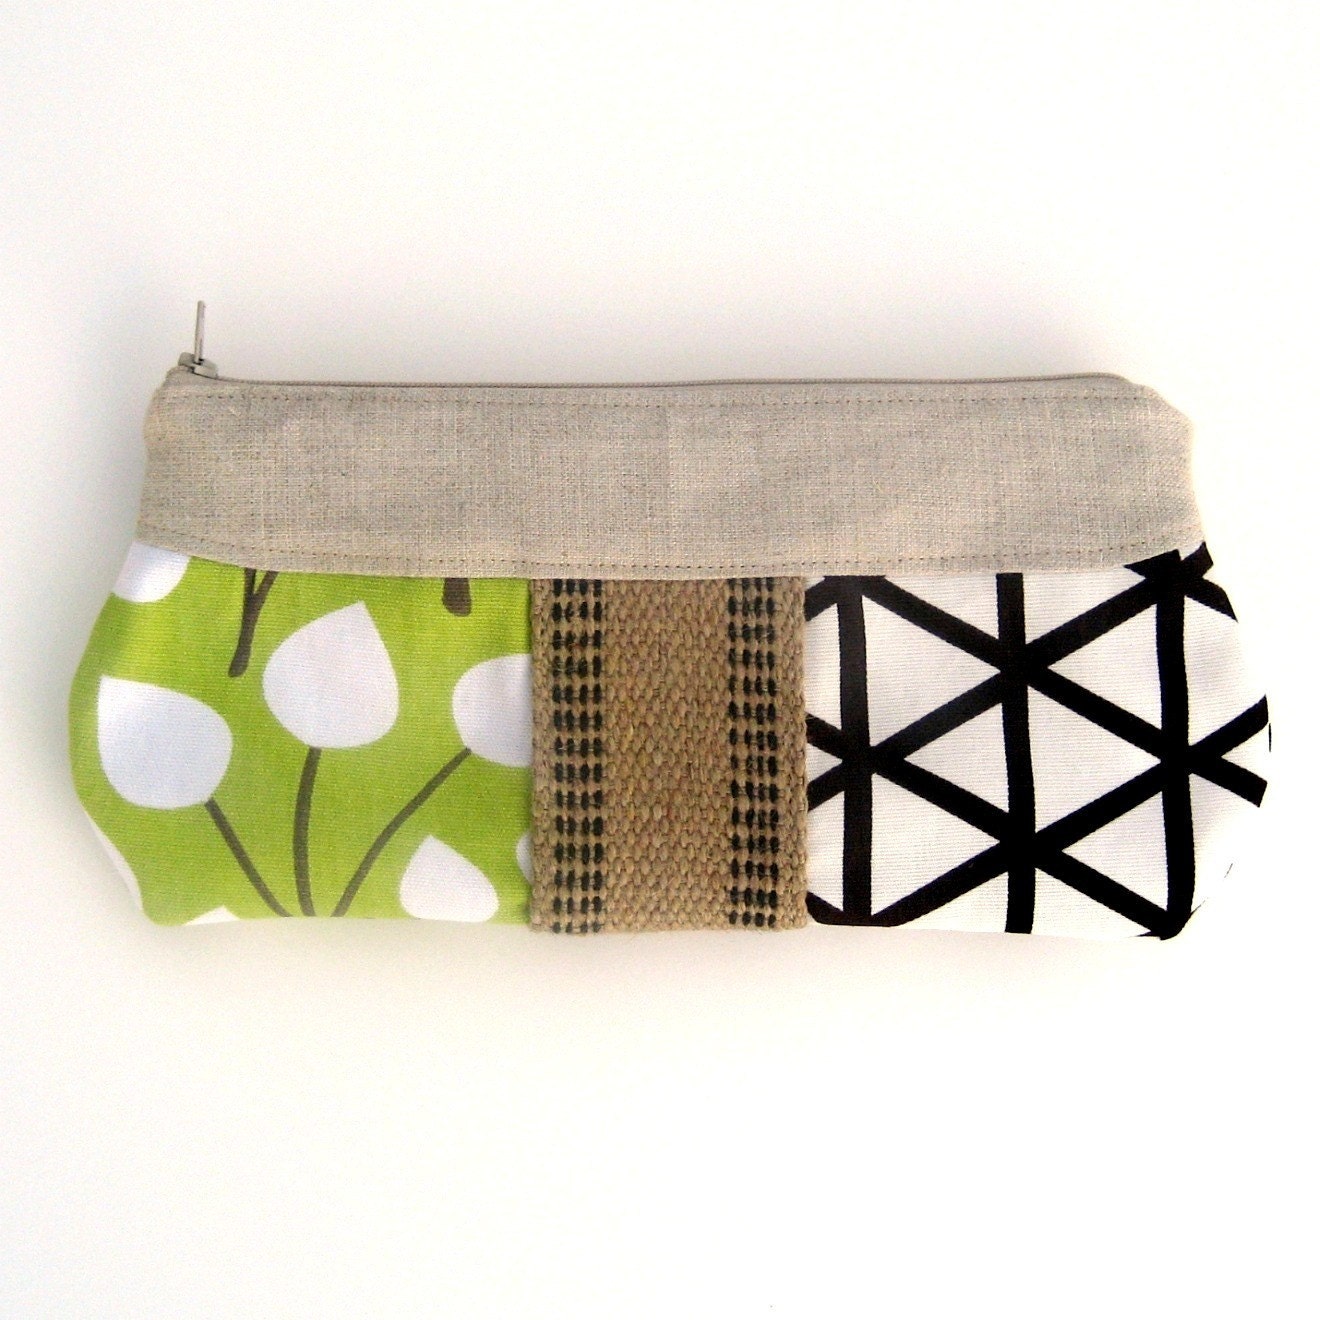 Modern Leaves clutch with jute detail